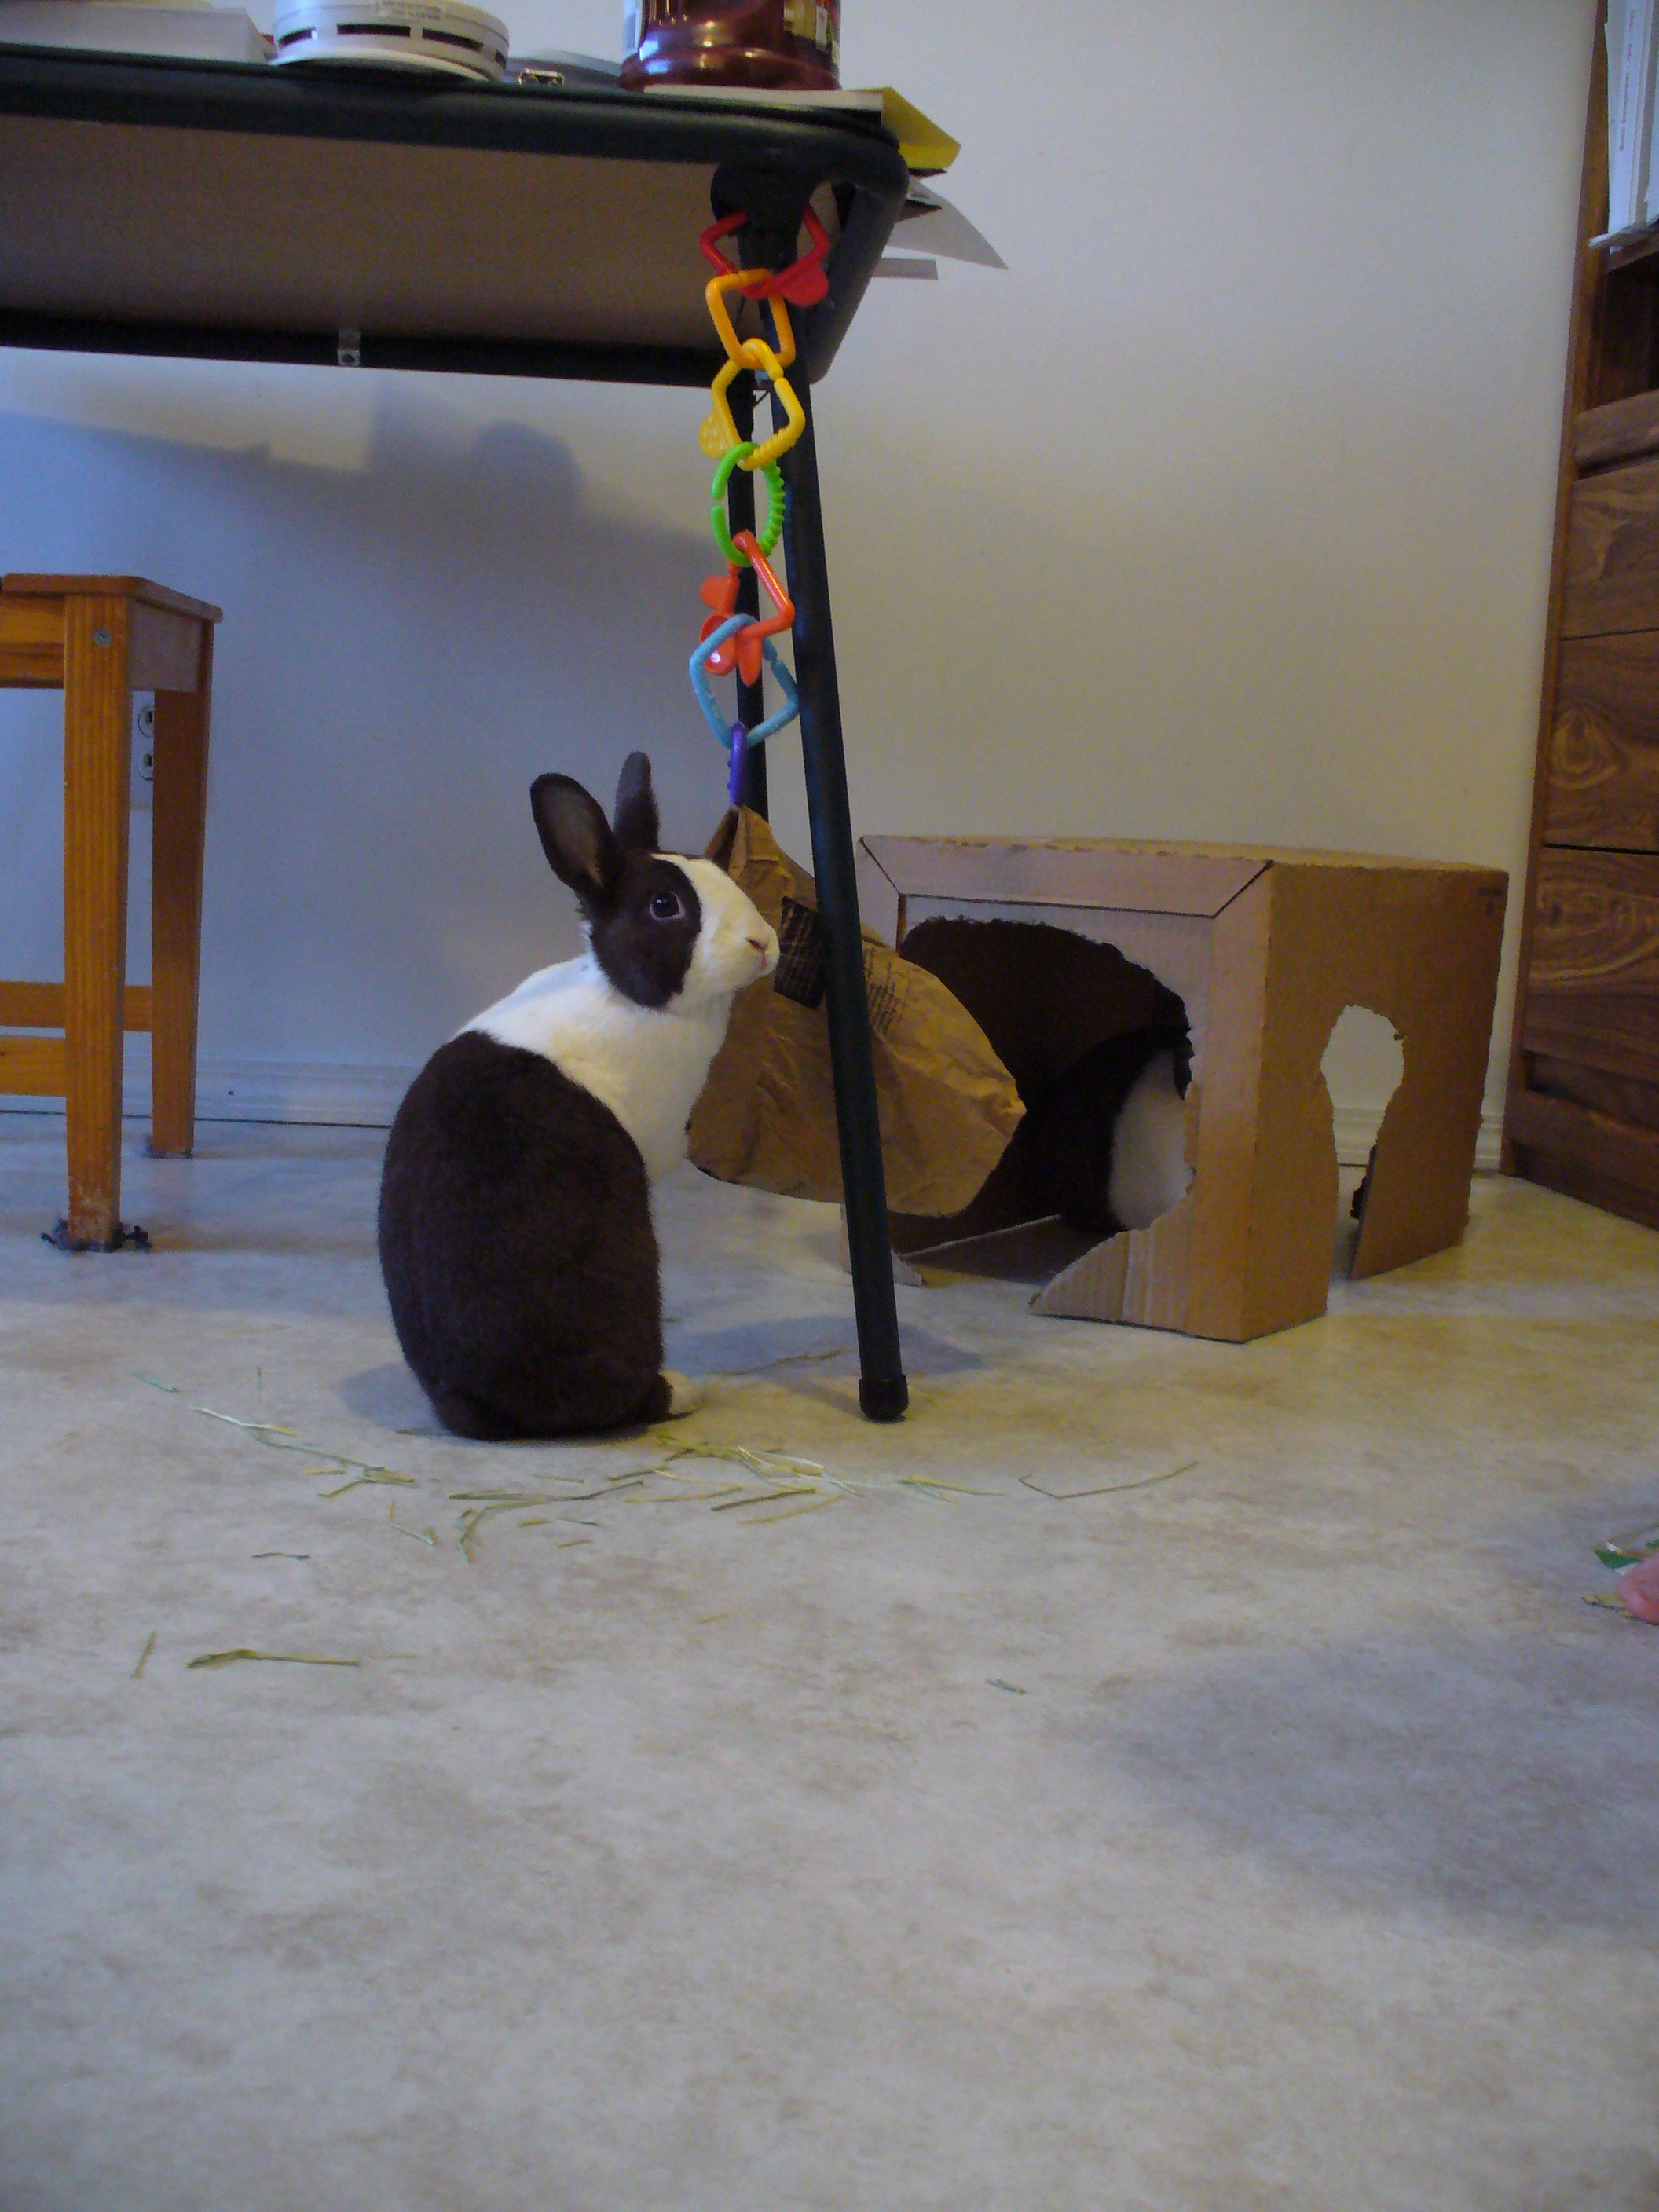 Does That Bag Need a Hay Refill, Bunny? 2